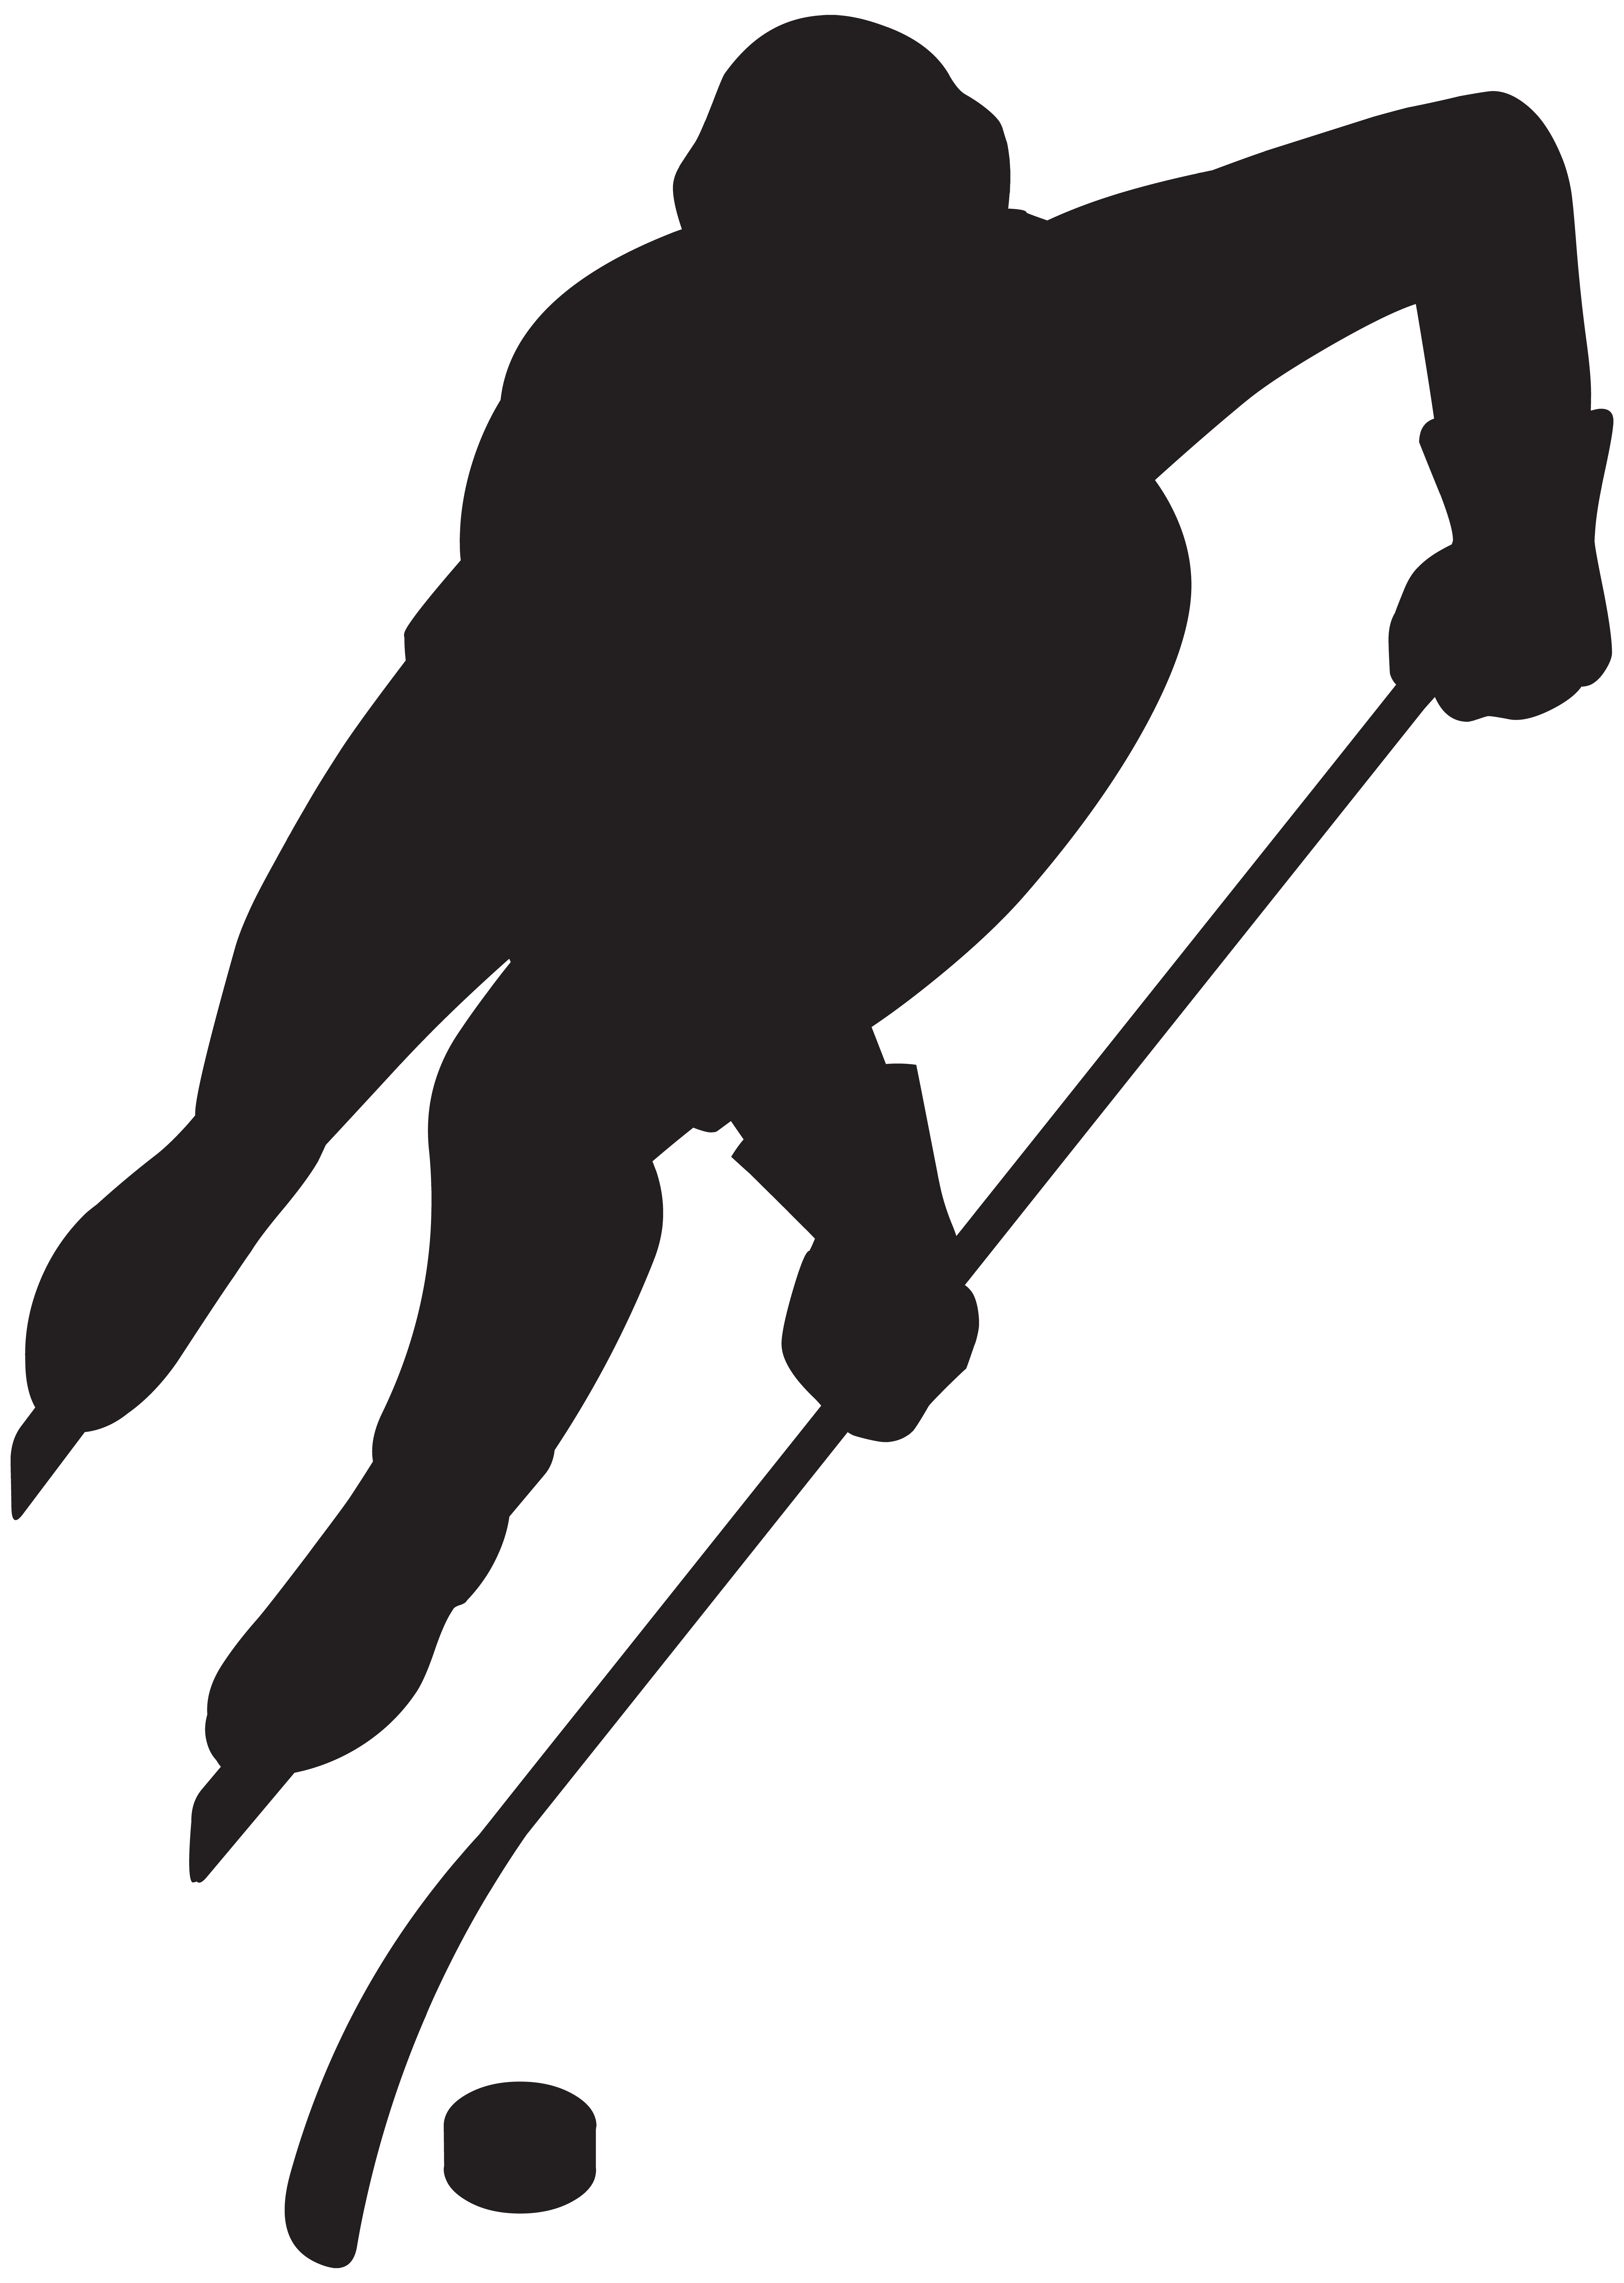 Hockey Player Silhouette PNG Clip Art Image.